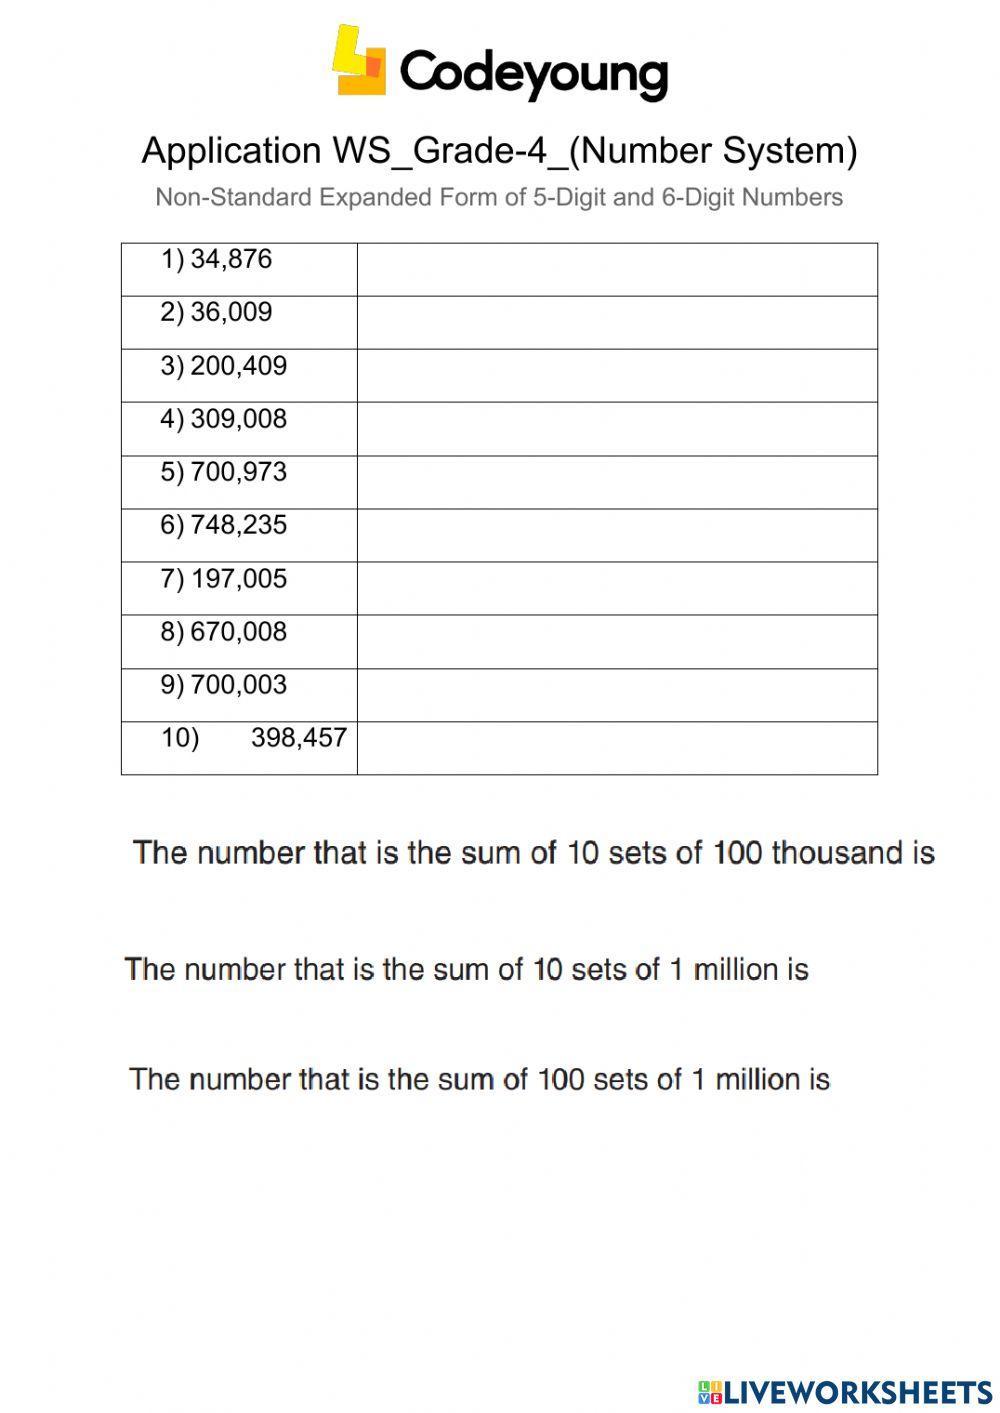 Non-Standard Expanded Form of 5-Digit and 6-Digit Numbers